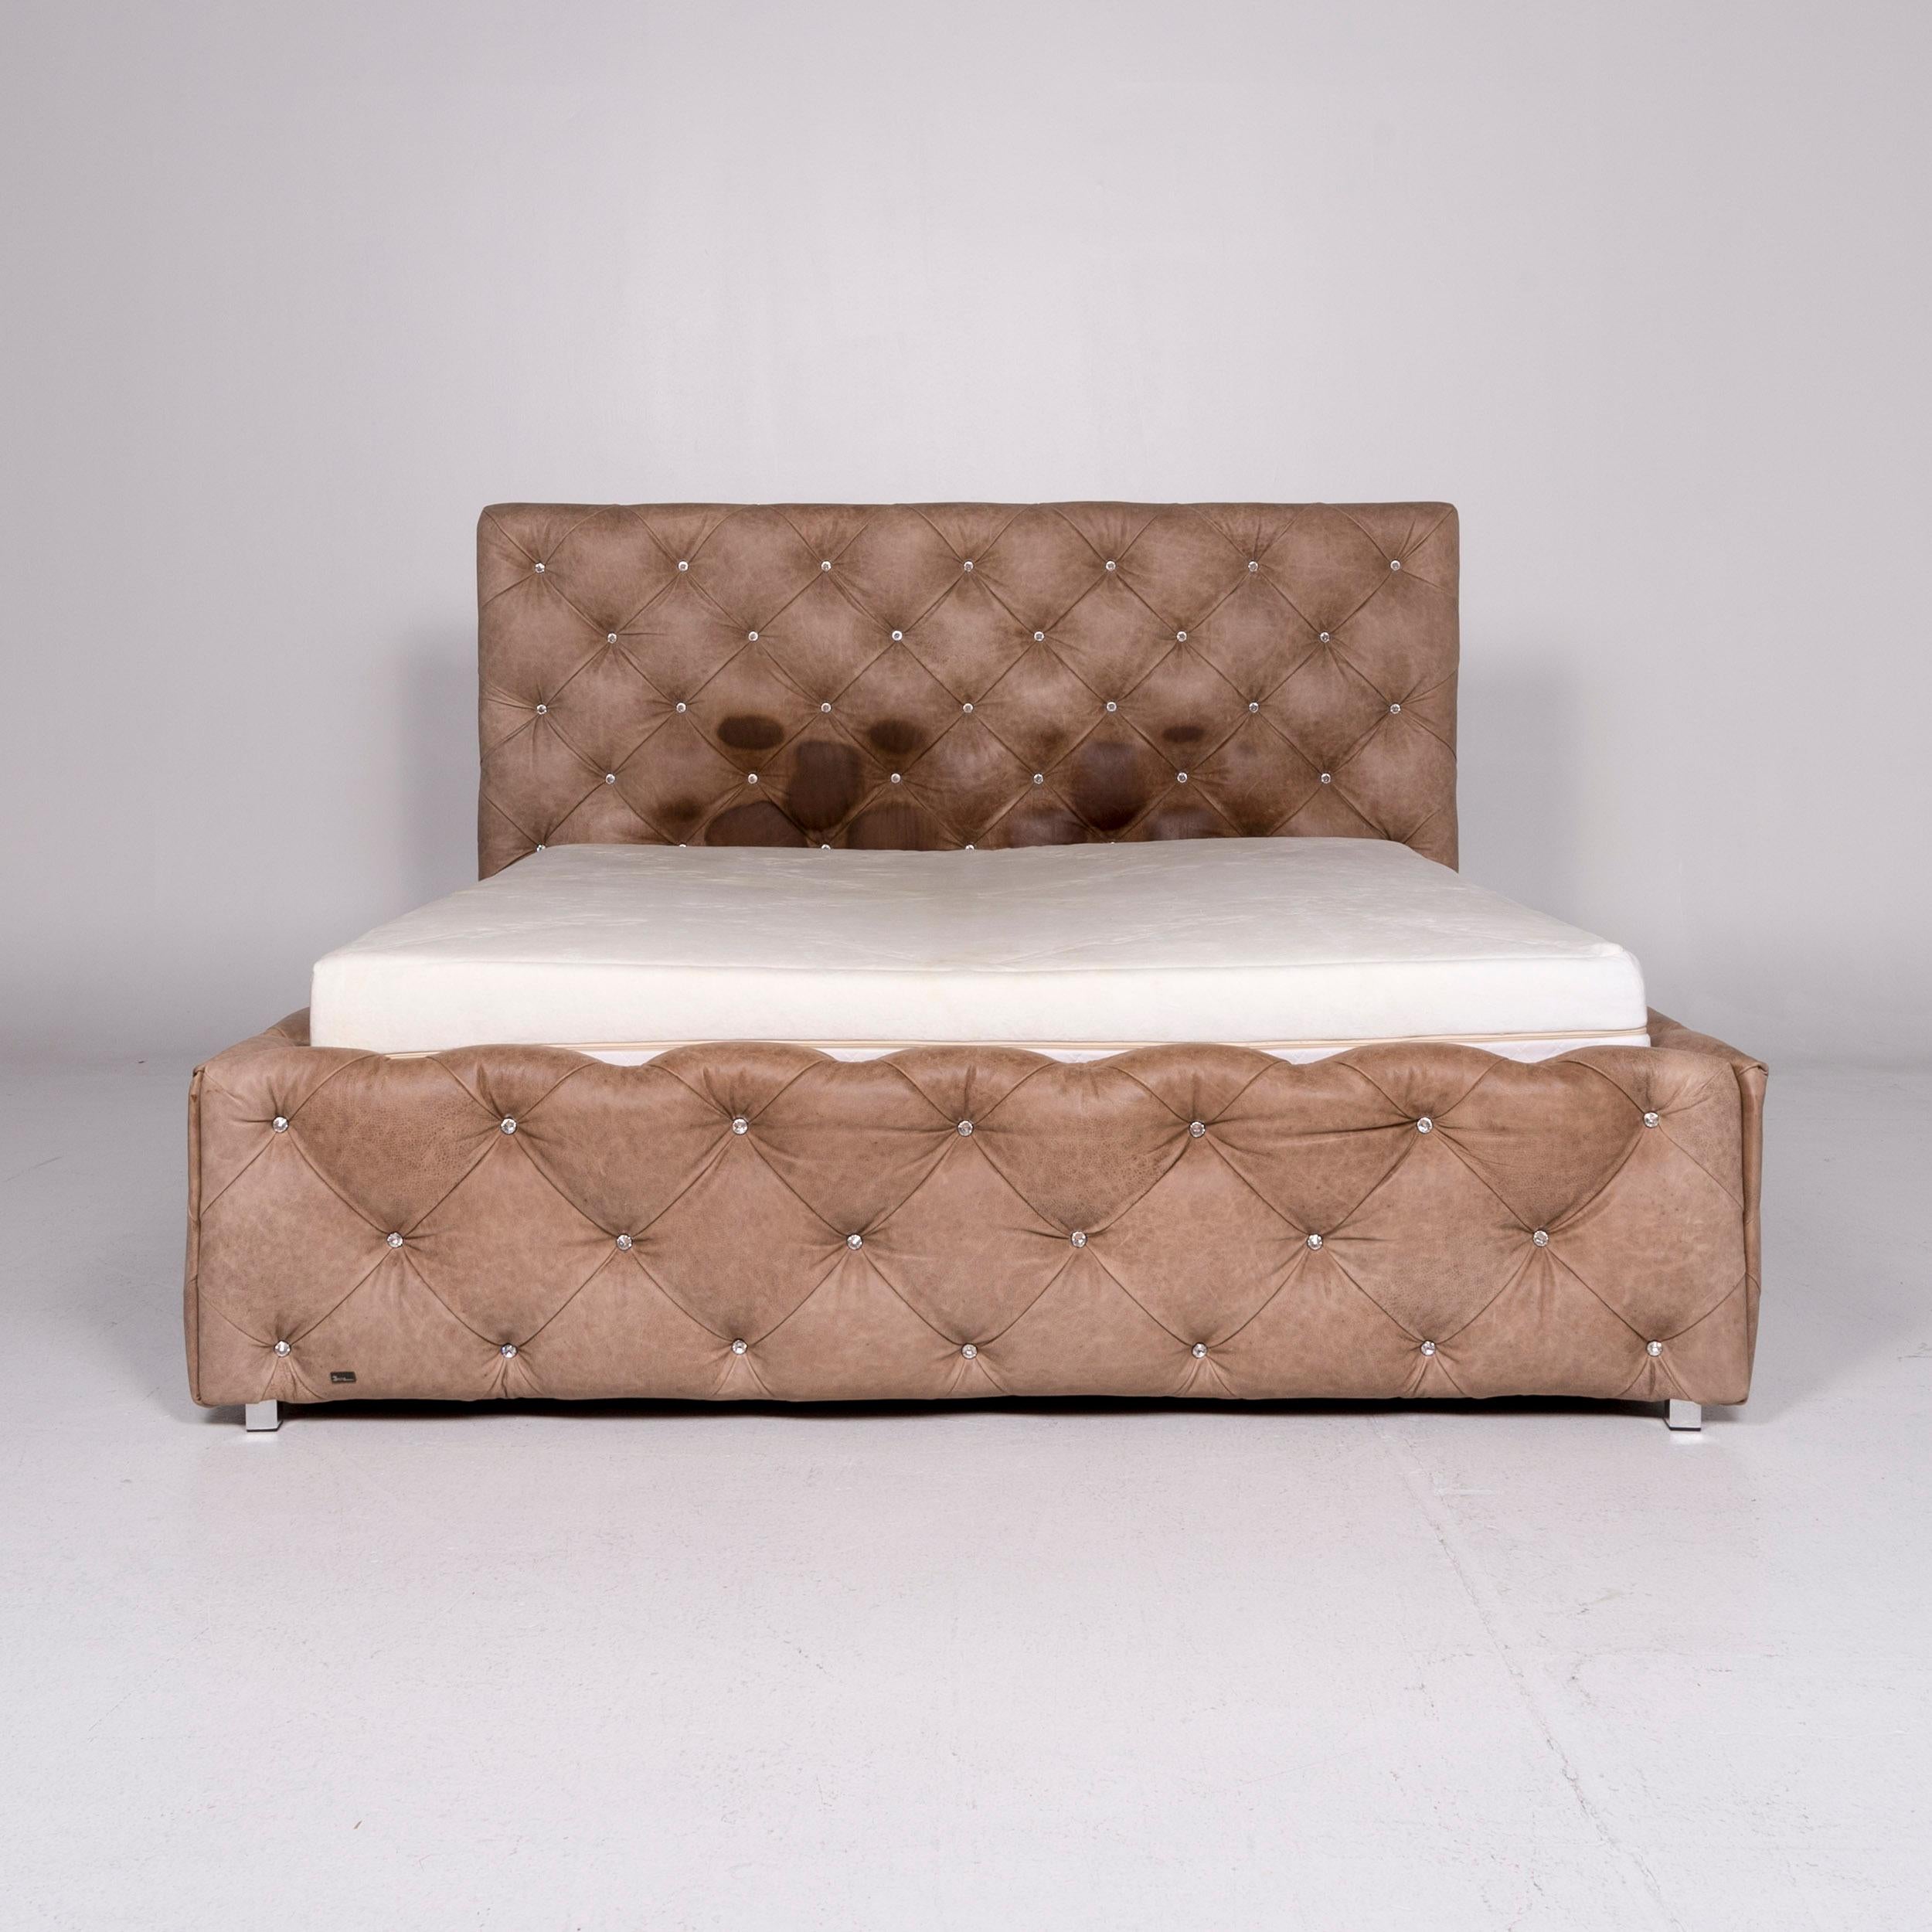 We bring to you a Bretz Marilyn leather bed brown Kaptionierung Glitterstones Pompös.
 
 Product measurements in centimeters:
 
Depth 225
Width 207
Height 130
Seat-height 62
Seat-depth 200
Seat-width 180
Back-height 70.

 